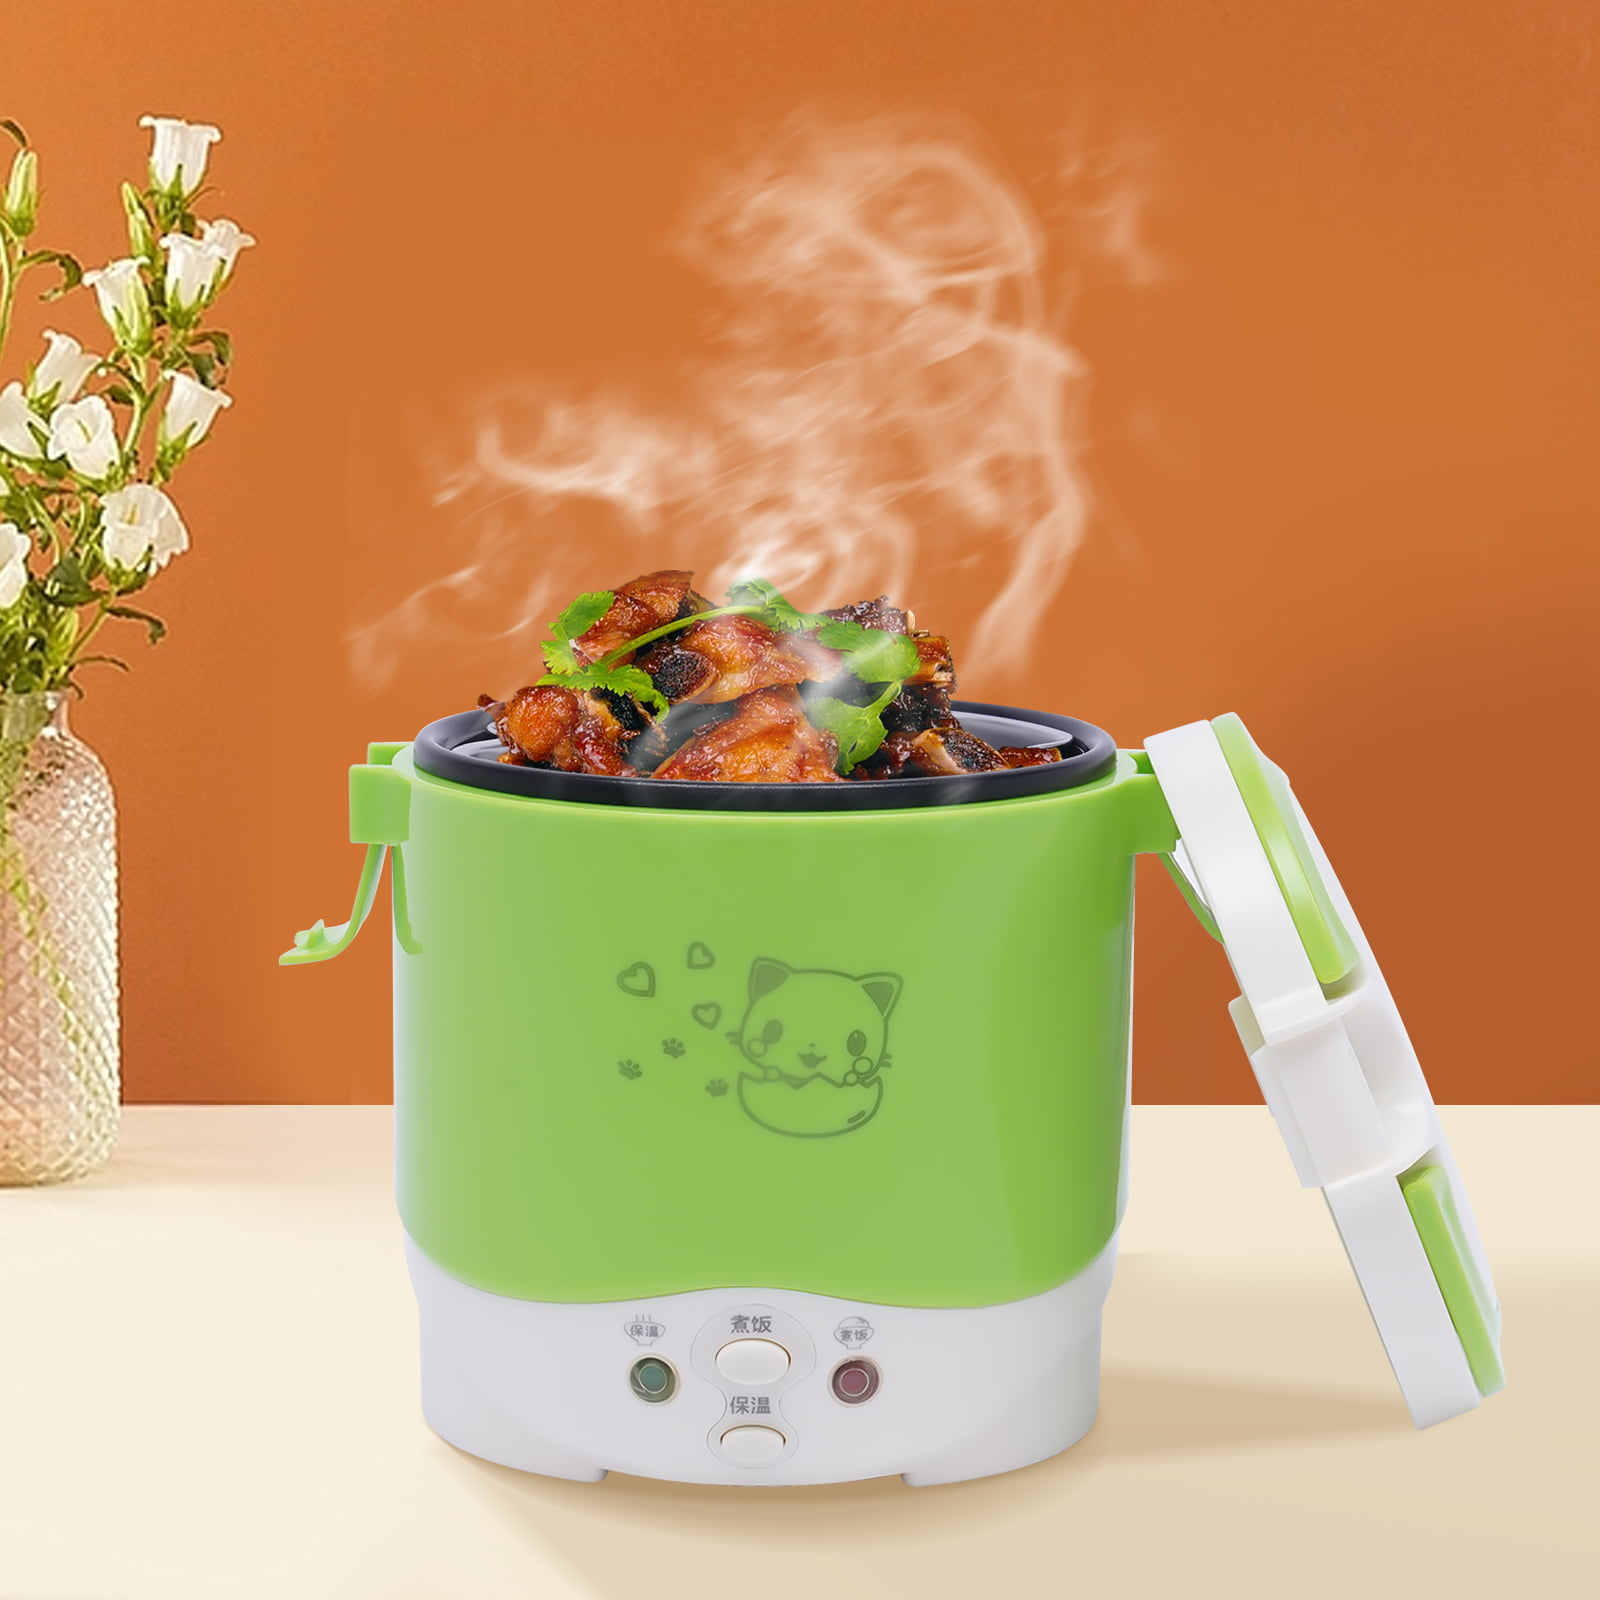 ZhdnBhnos 1 Cup Mini Rice Cooker Steamer 12V Portable Food Warmer Lunch Box  for Car Cooking for Soup Porridge Rice